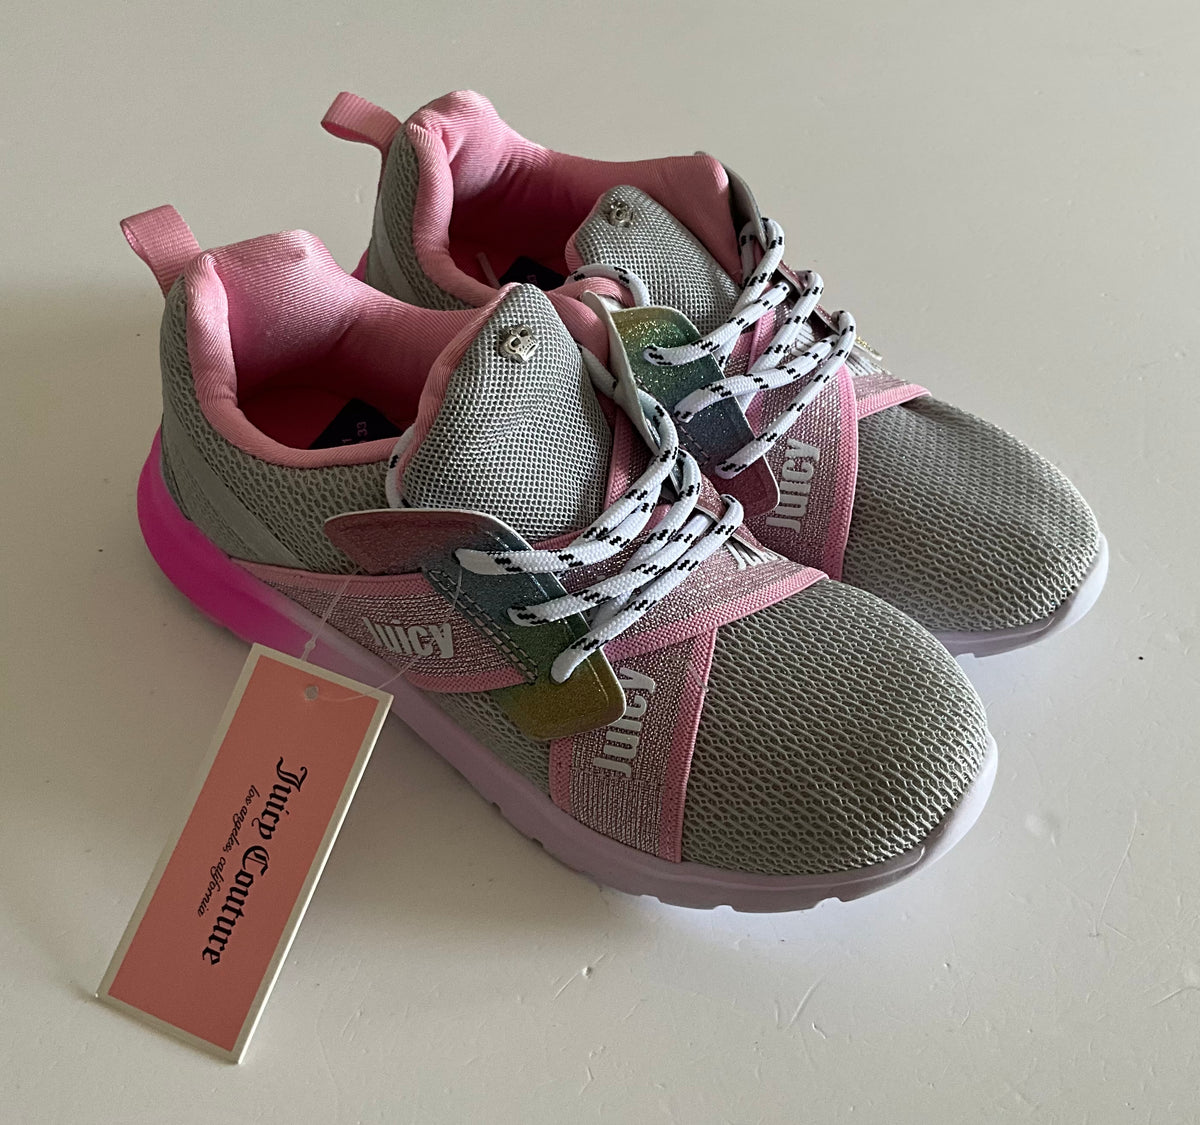 Juicy Couture Trainers, BNWT, Junior Size 1